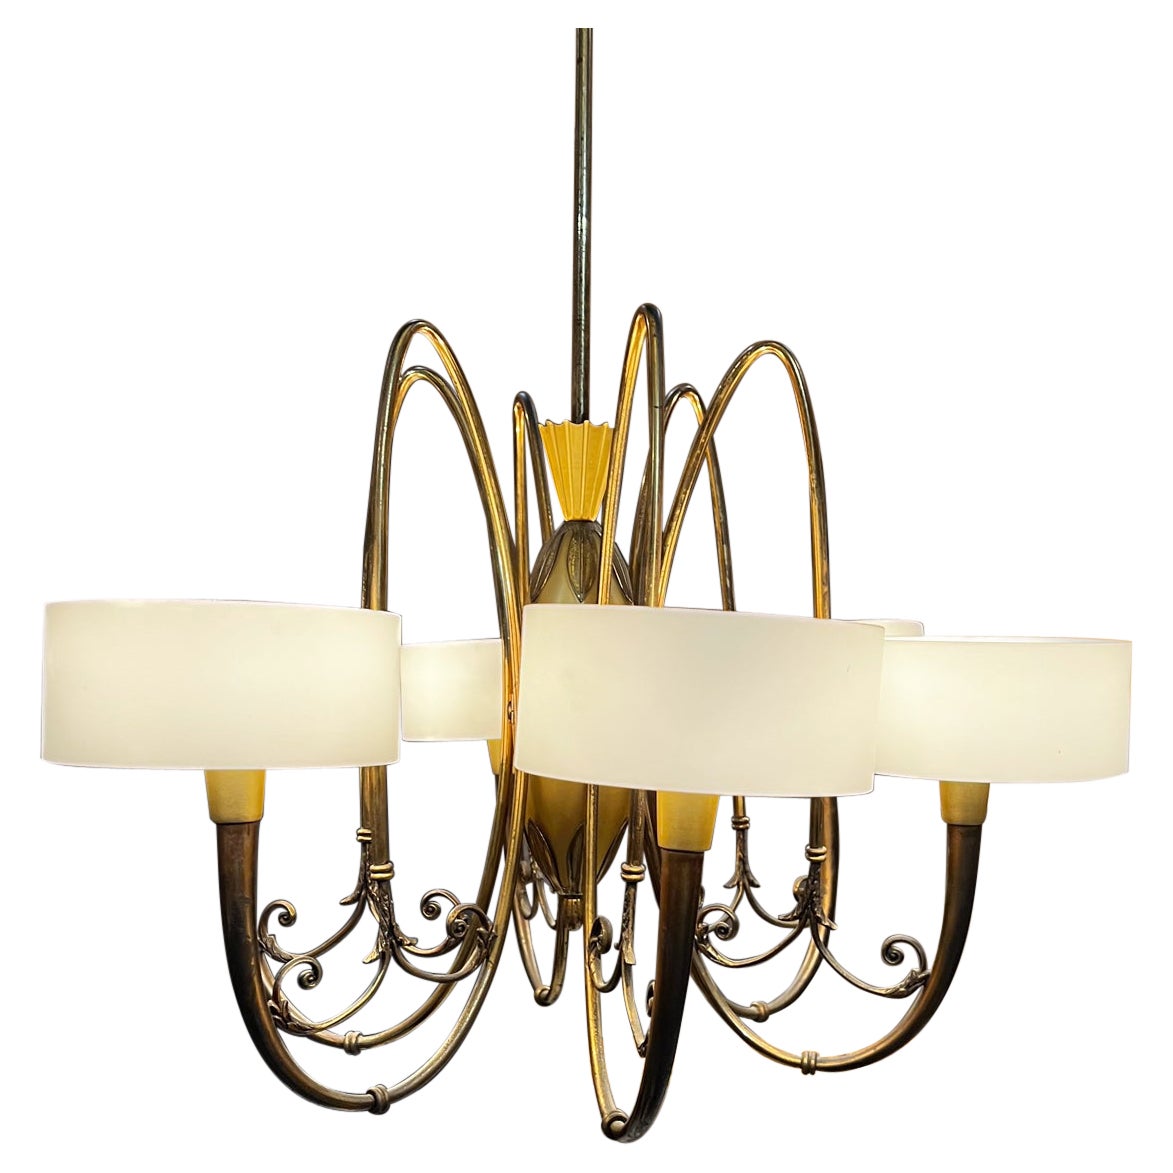 1950s Elegance Sculptural Six Arm Chandelier Multi Tone Brass Italy For Sale